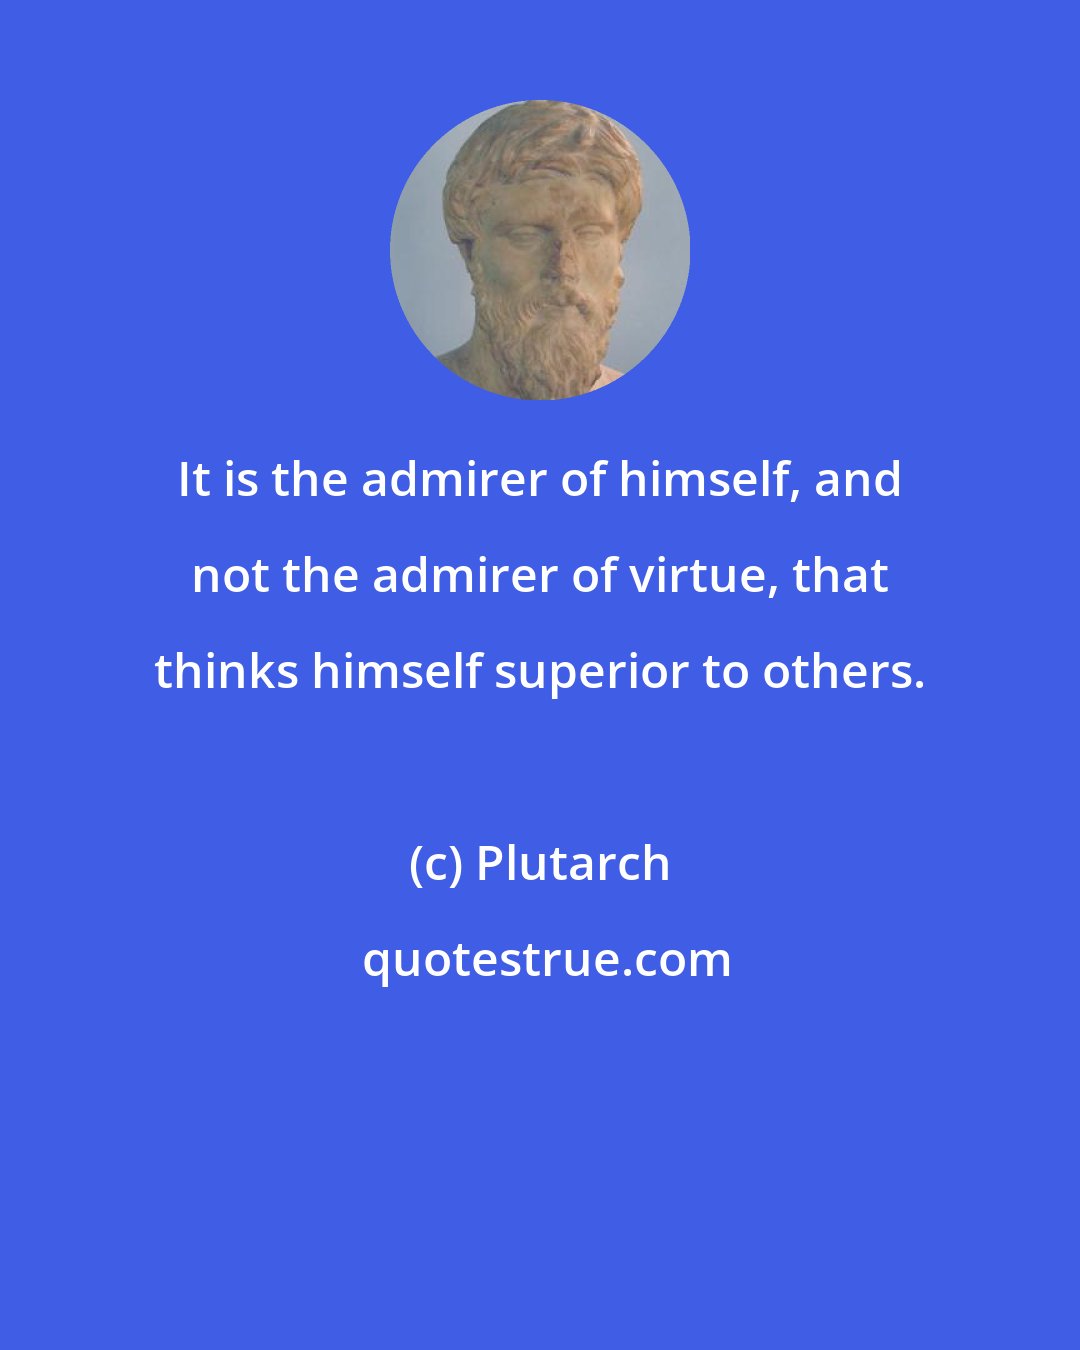 Plutarch: It is the admirer of himself, and not the admirer of virtue, that thinks himself superior to others.